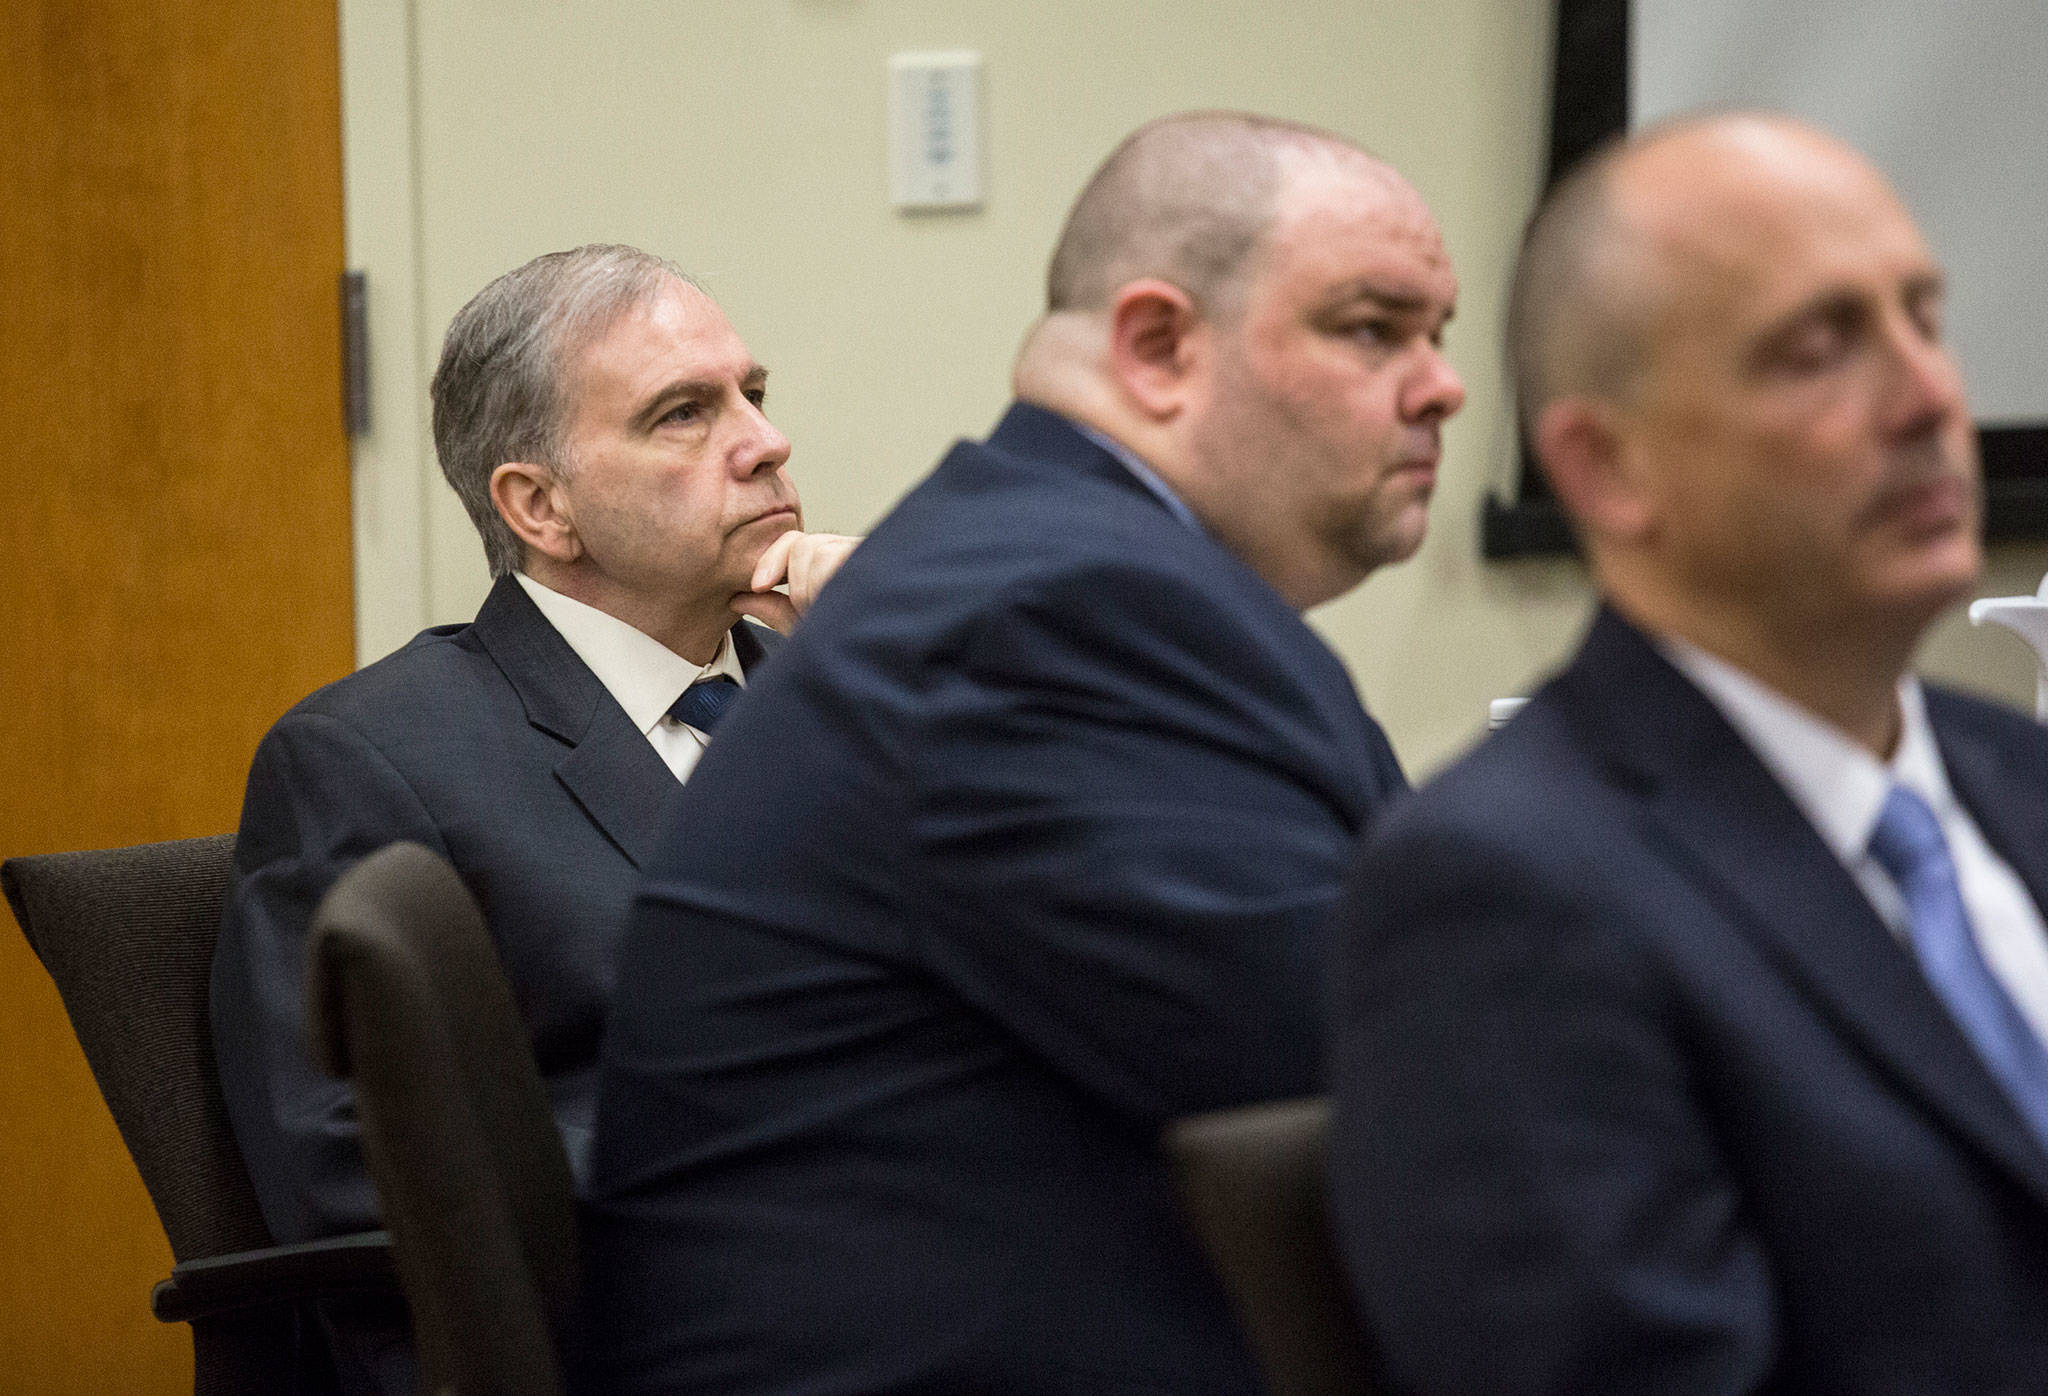 John Blaine Reed (left) accused of murdering Monique Patenaude and Patrick Shunn, listens as Snohomish County chief criminal deputy prosecutor Craig Matheson makes opening statements in his trial at the Snohomish County Courthouse on Thursday in Everett. (Andy Bronson / The Herald)